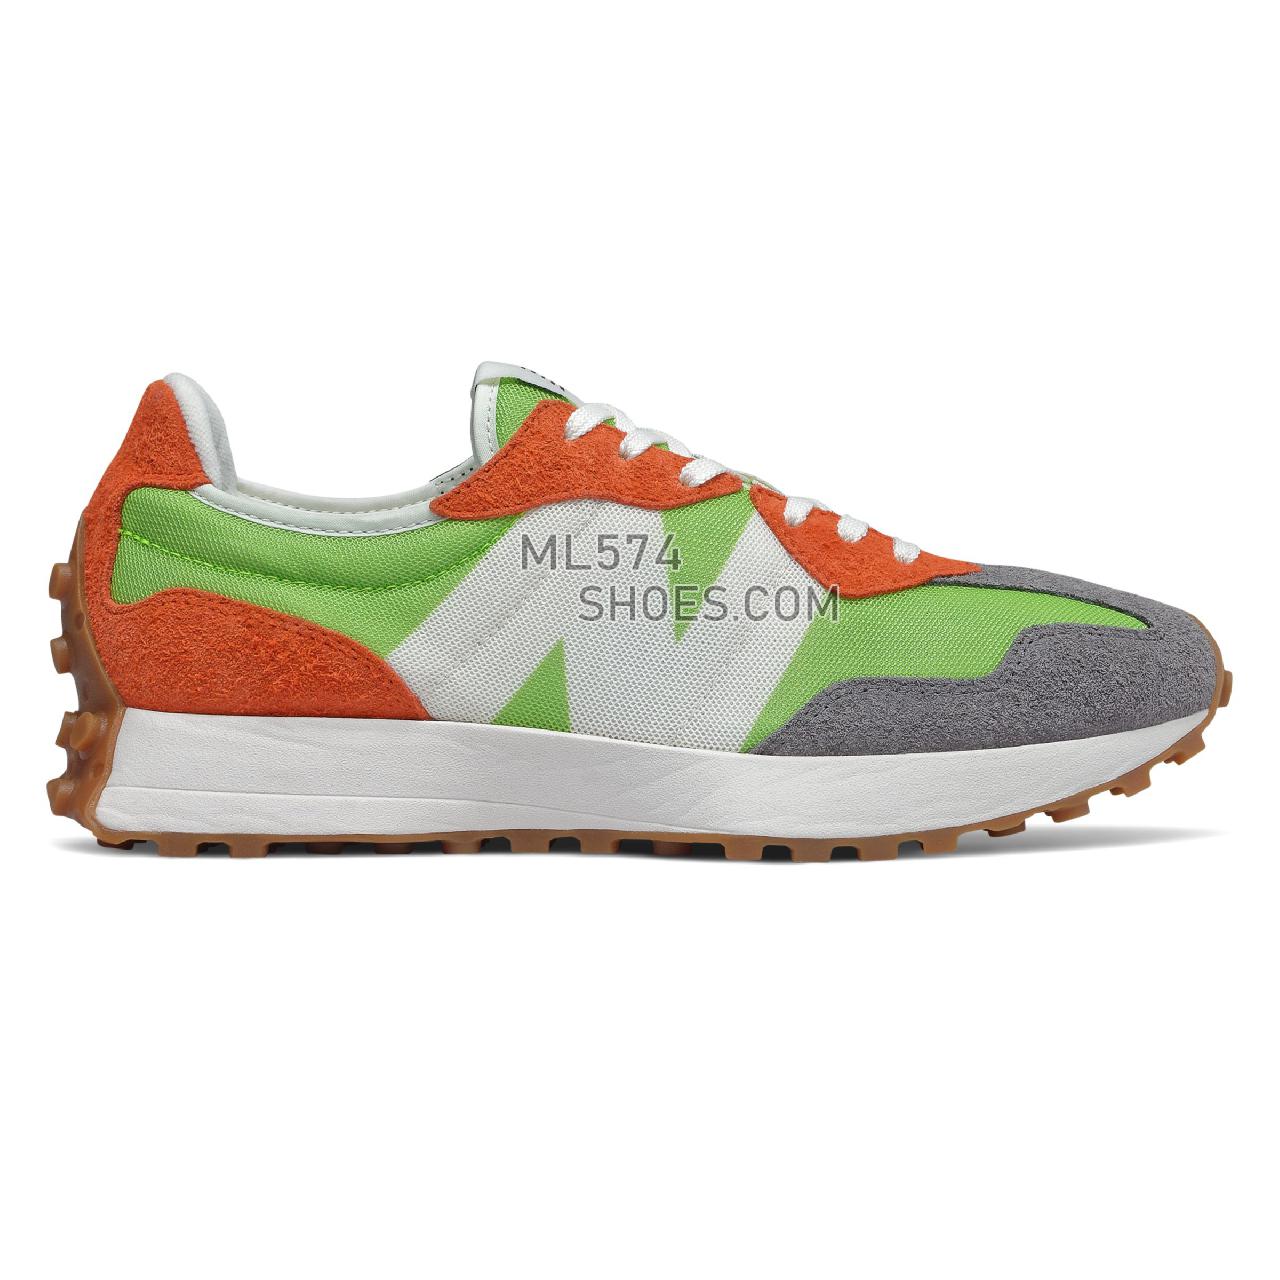 New Balance 327 - Men's Sport Style Sneakers - Energy Lime with Dark Blaze - MS327SFA